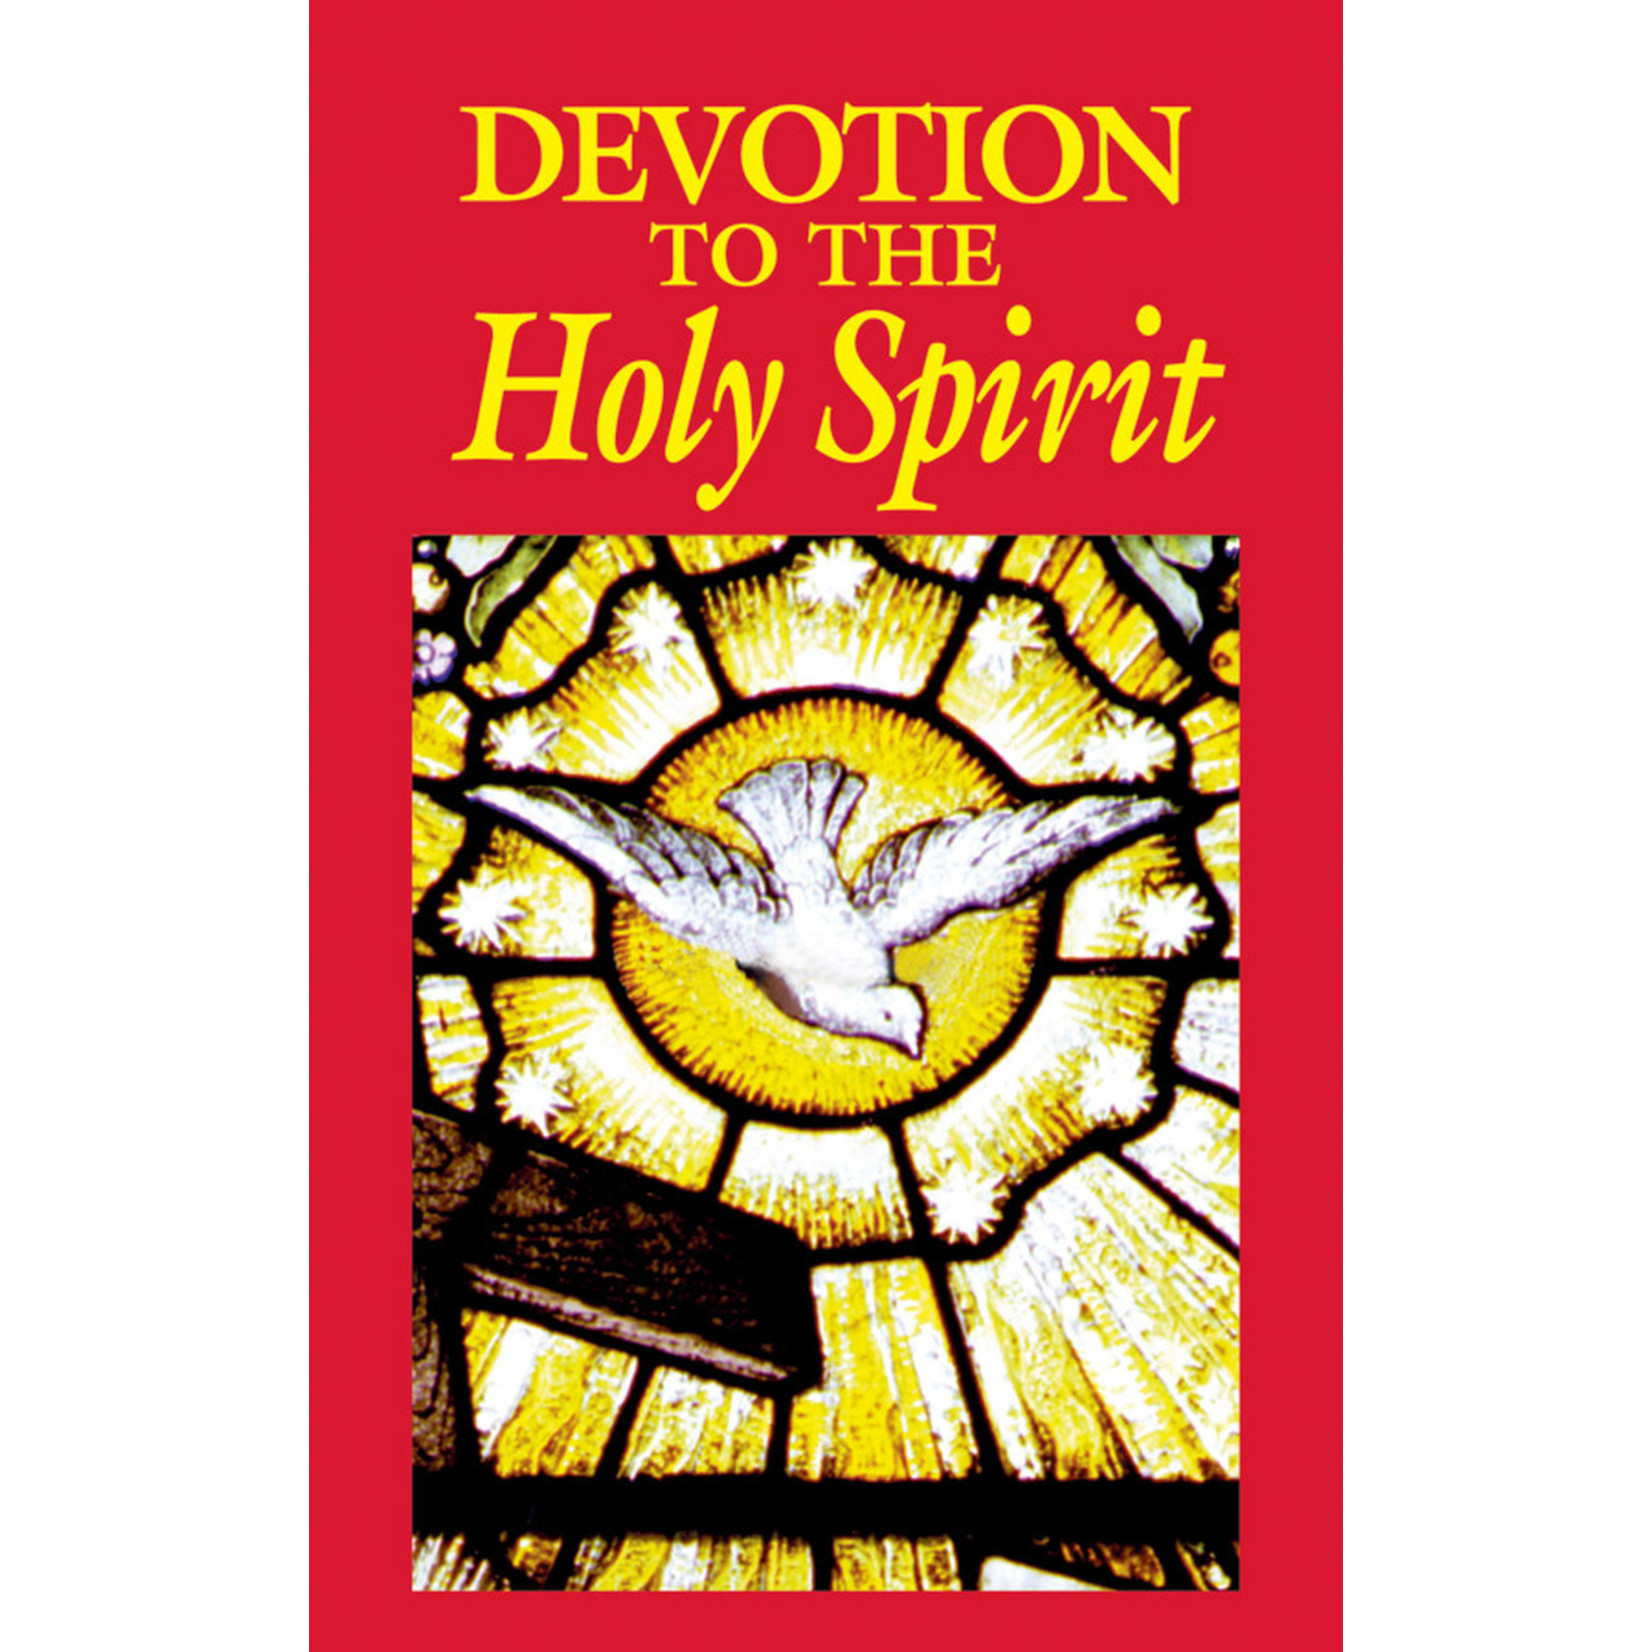 Devotion to the Holy Spirit